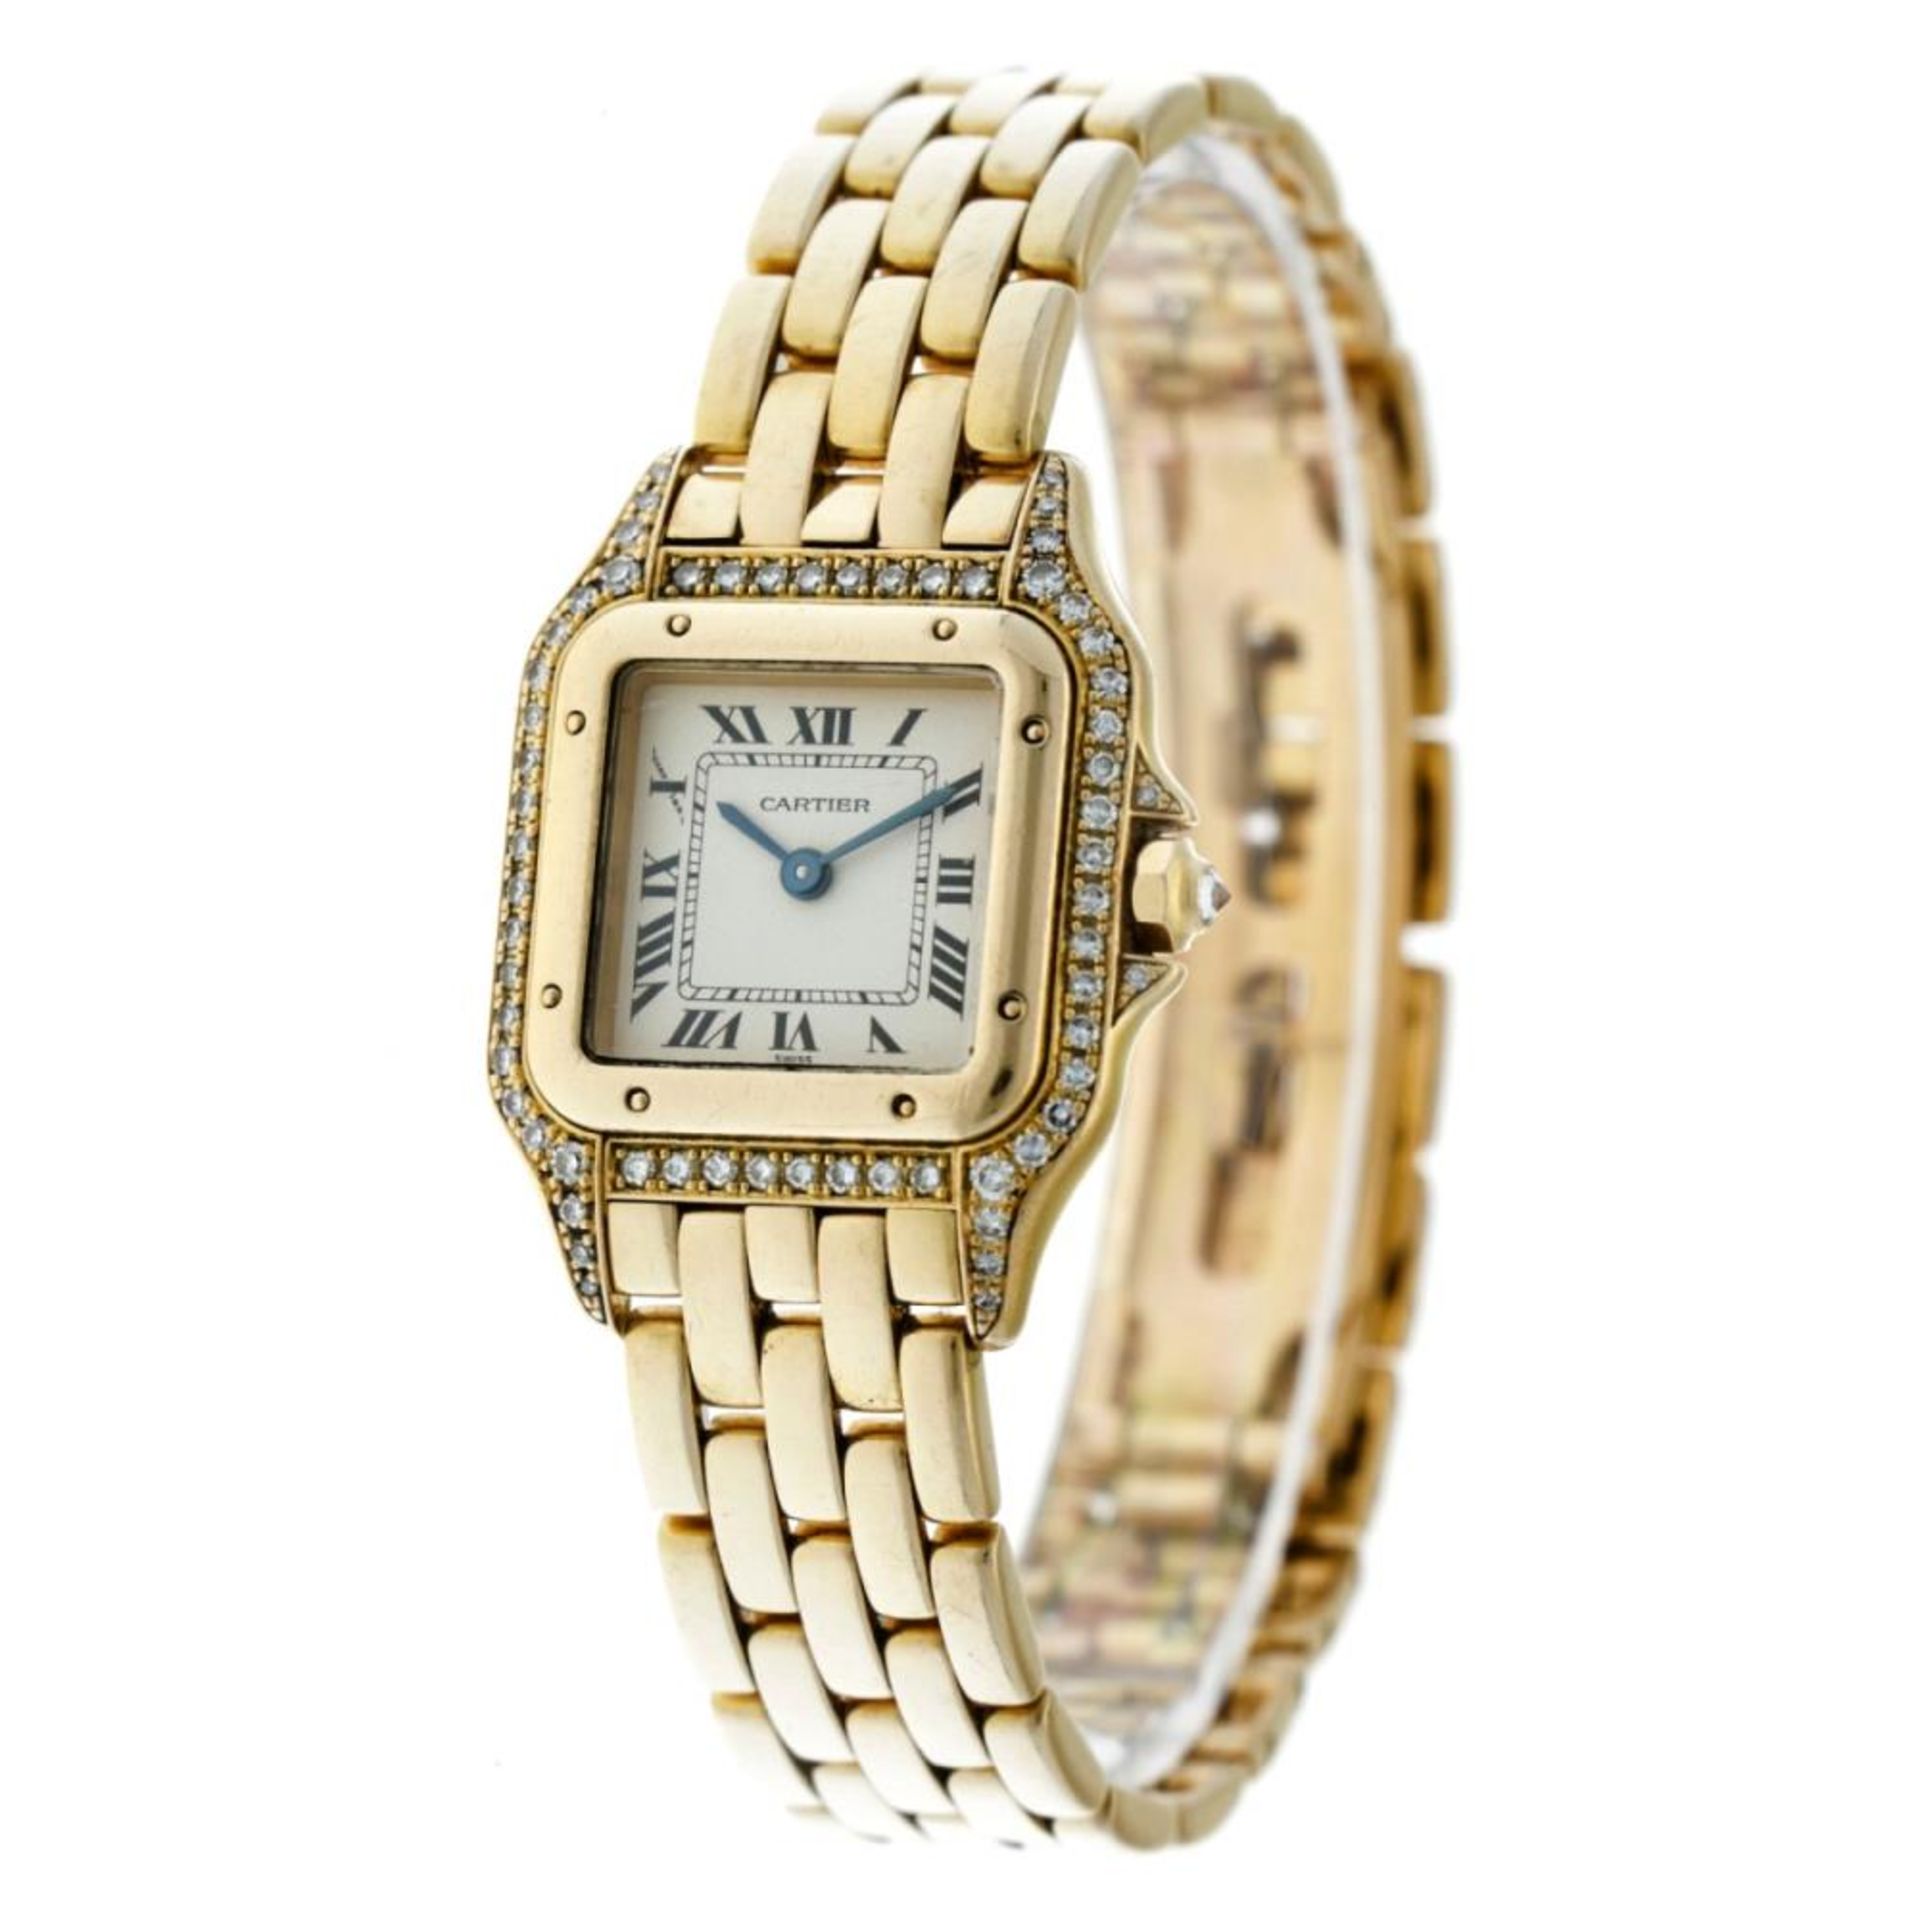 Cartier Panthere 1280 - Ladies watch - approx. 1995. - Image 3 of 10